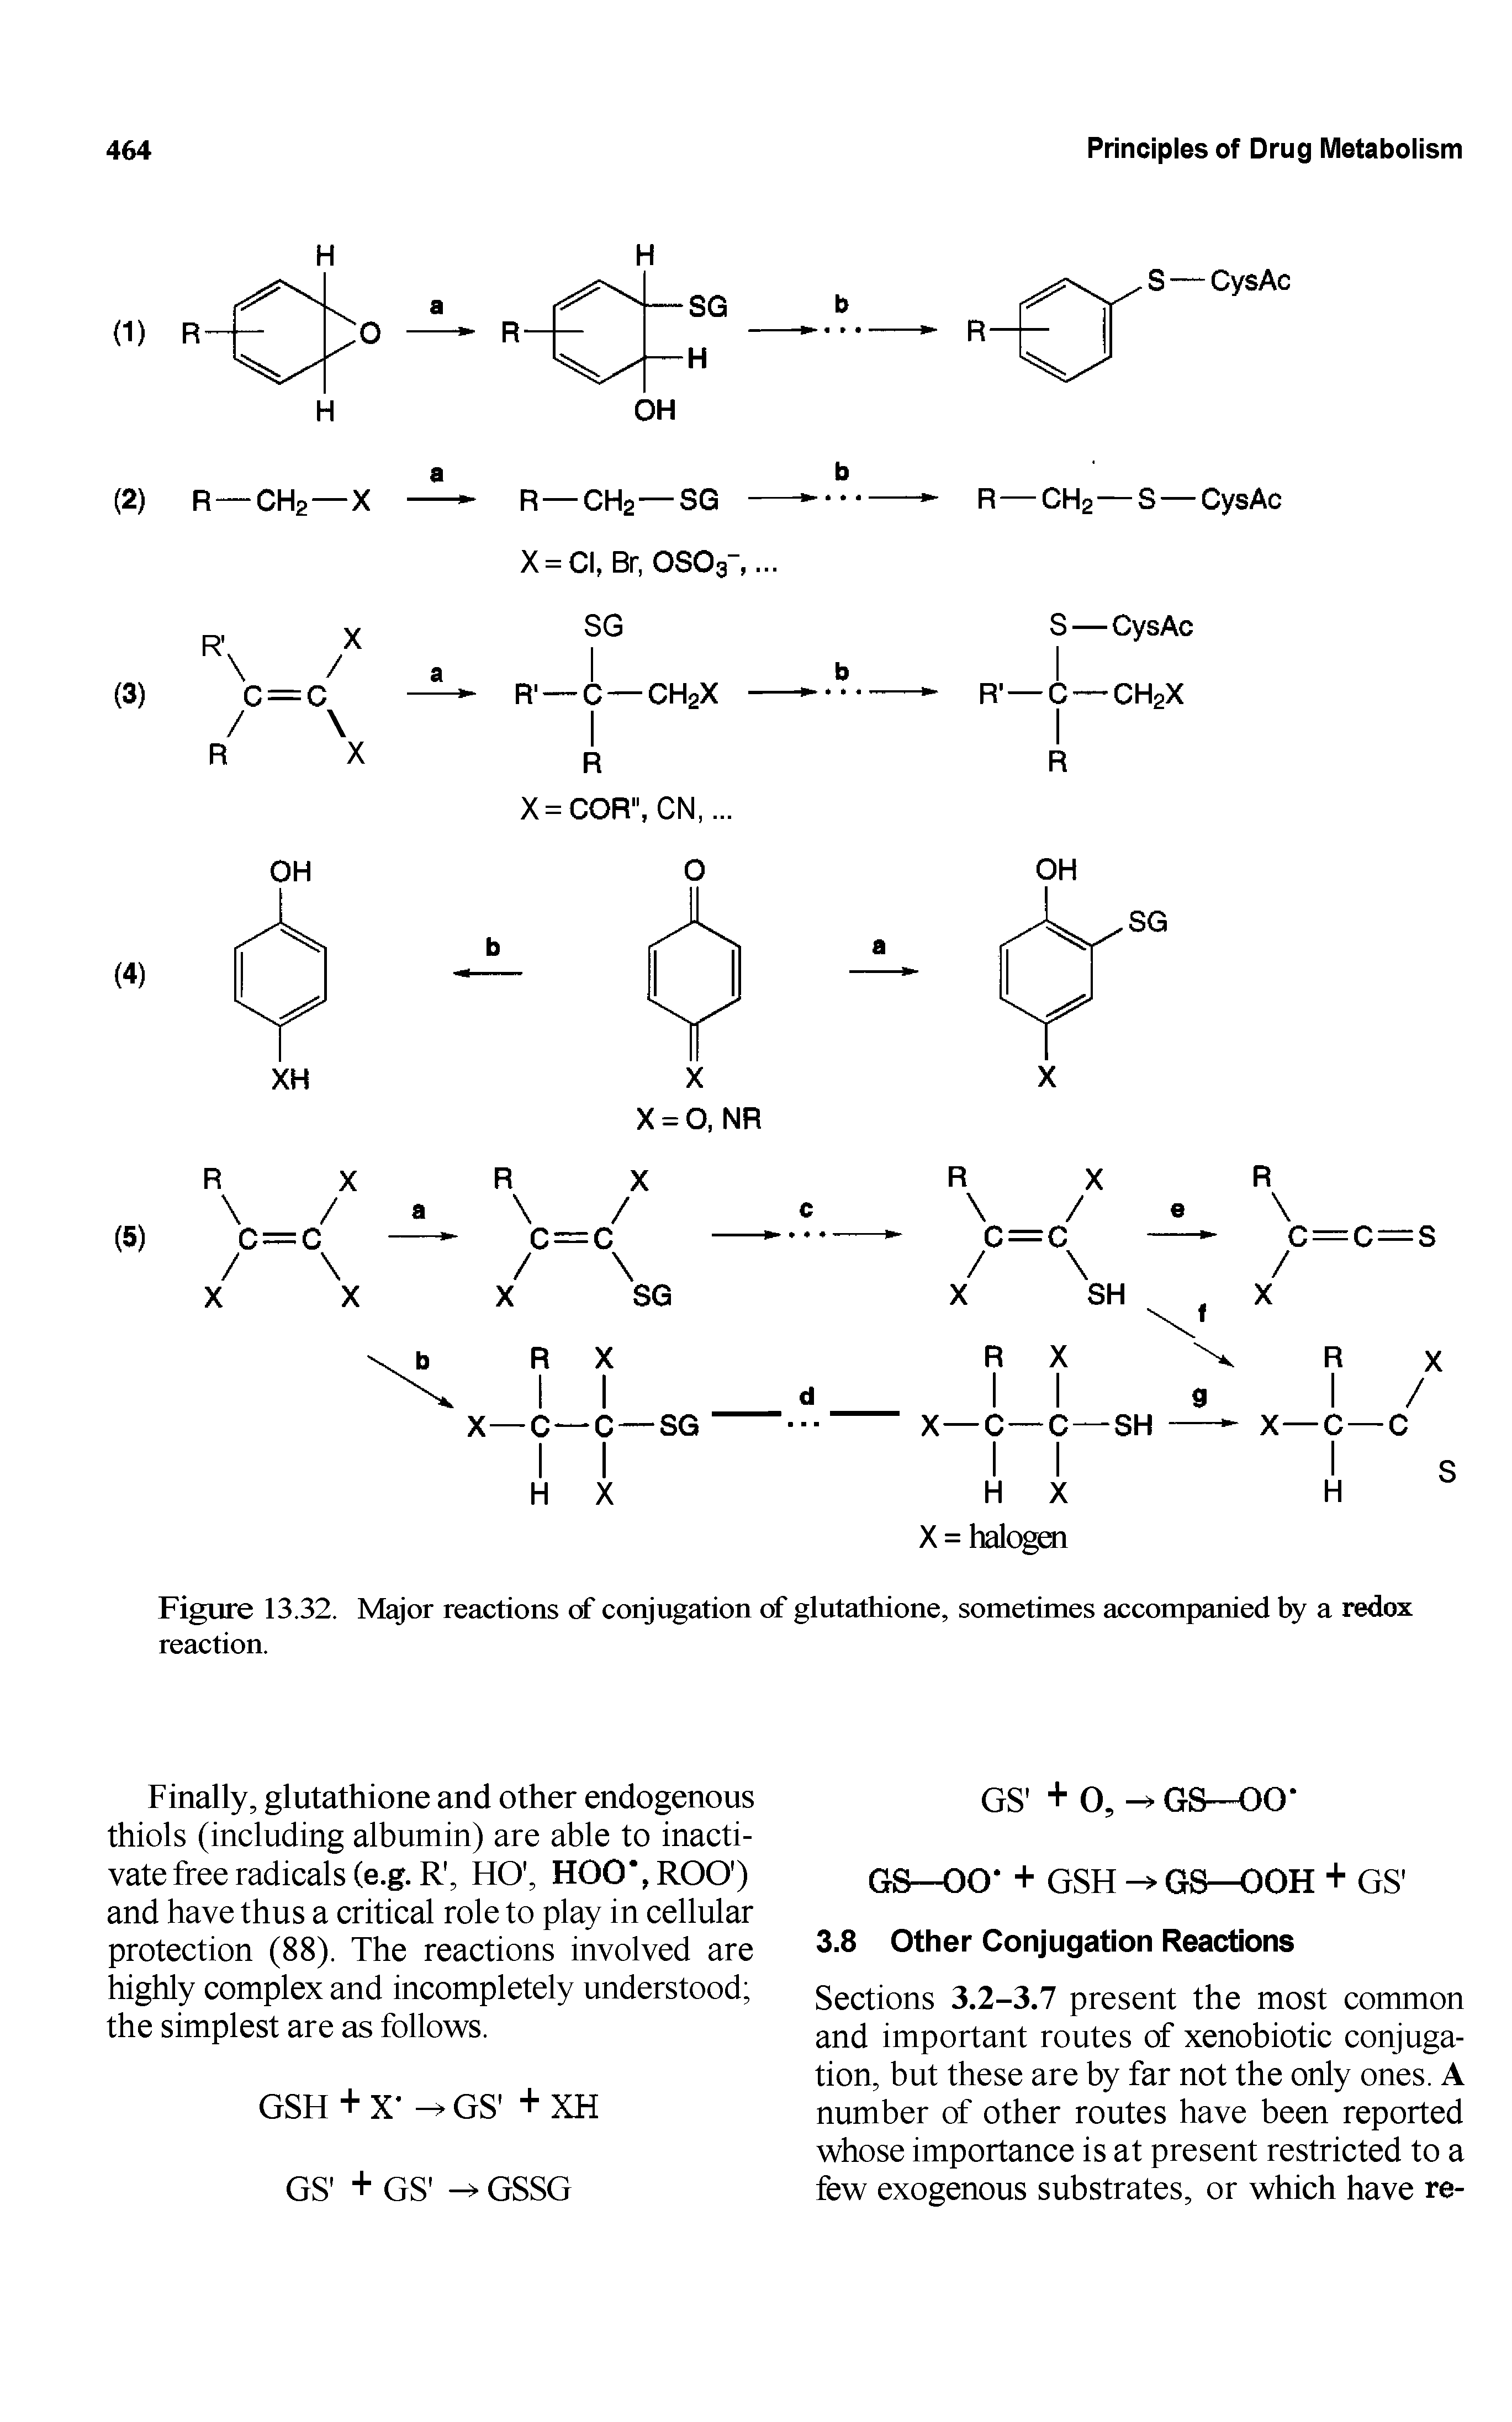 Figure 13.32. Major reactions of conjugation of glutathione, sometimes accompanied by a redox reaction.